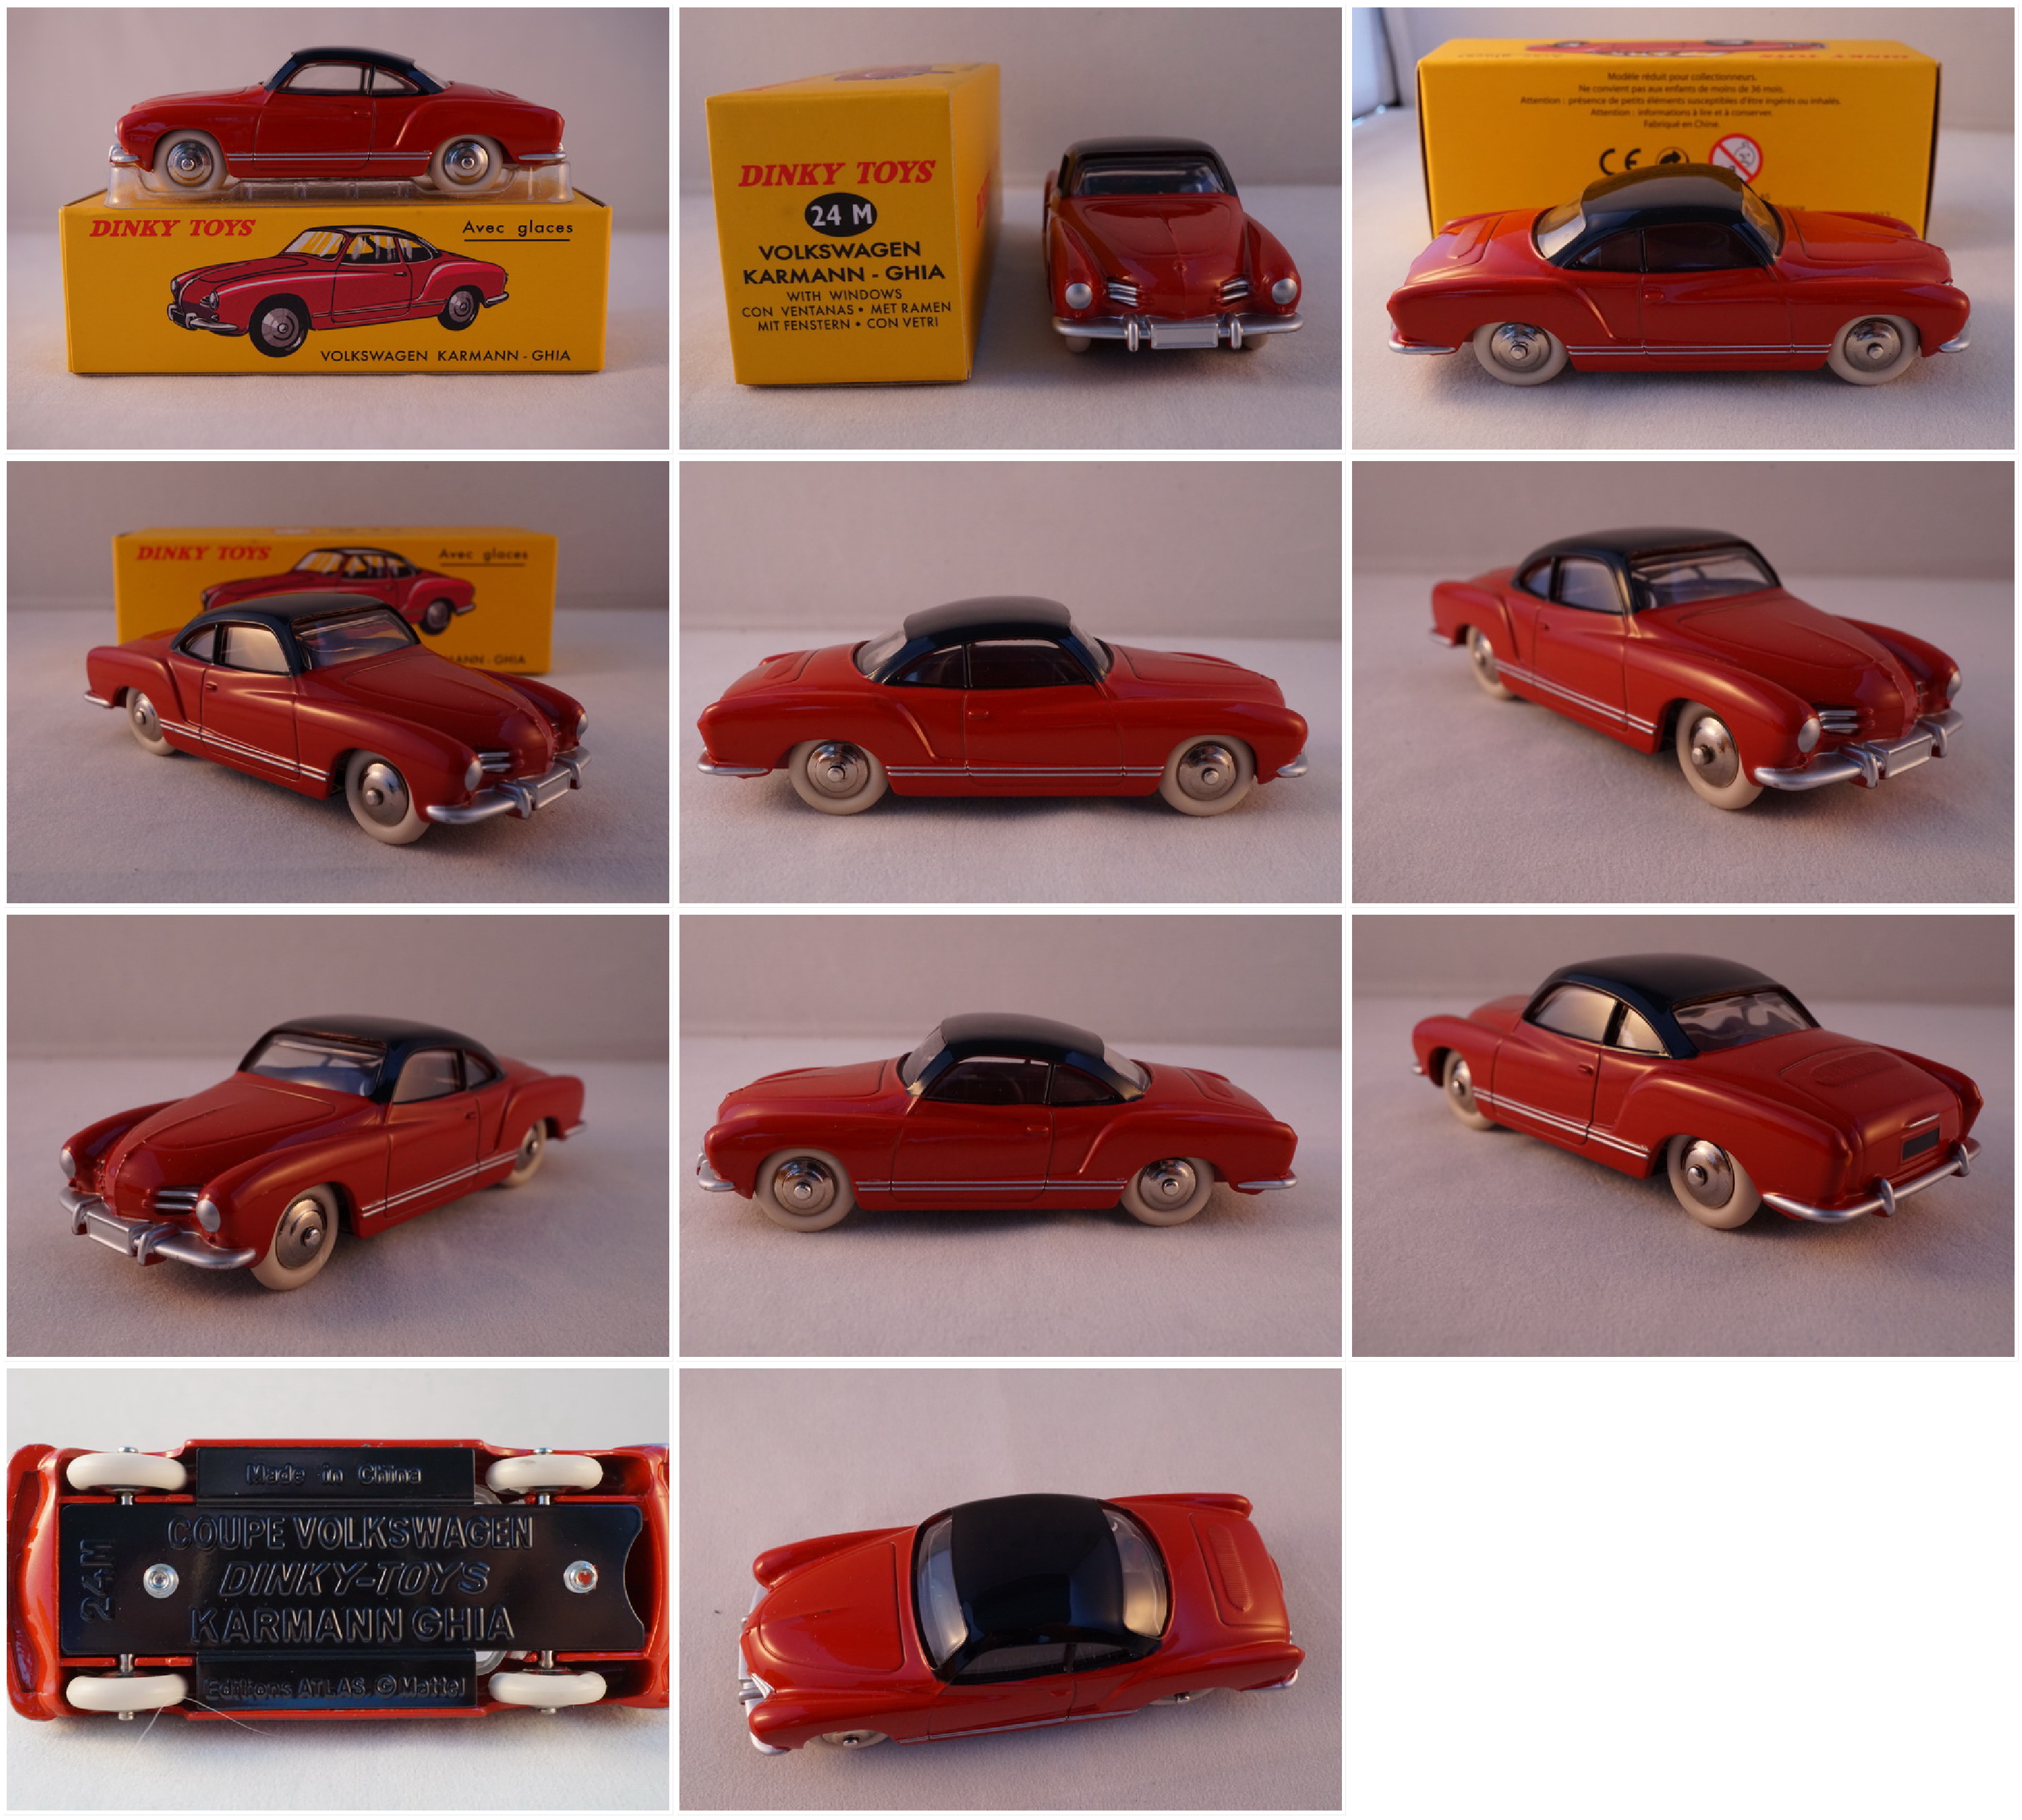 Dinky Toys by Atlas model cars by ETNL Diecast models